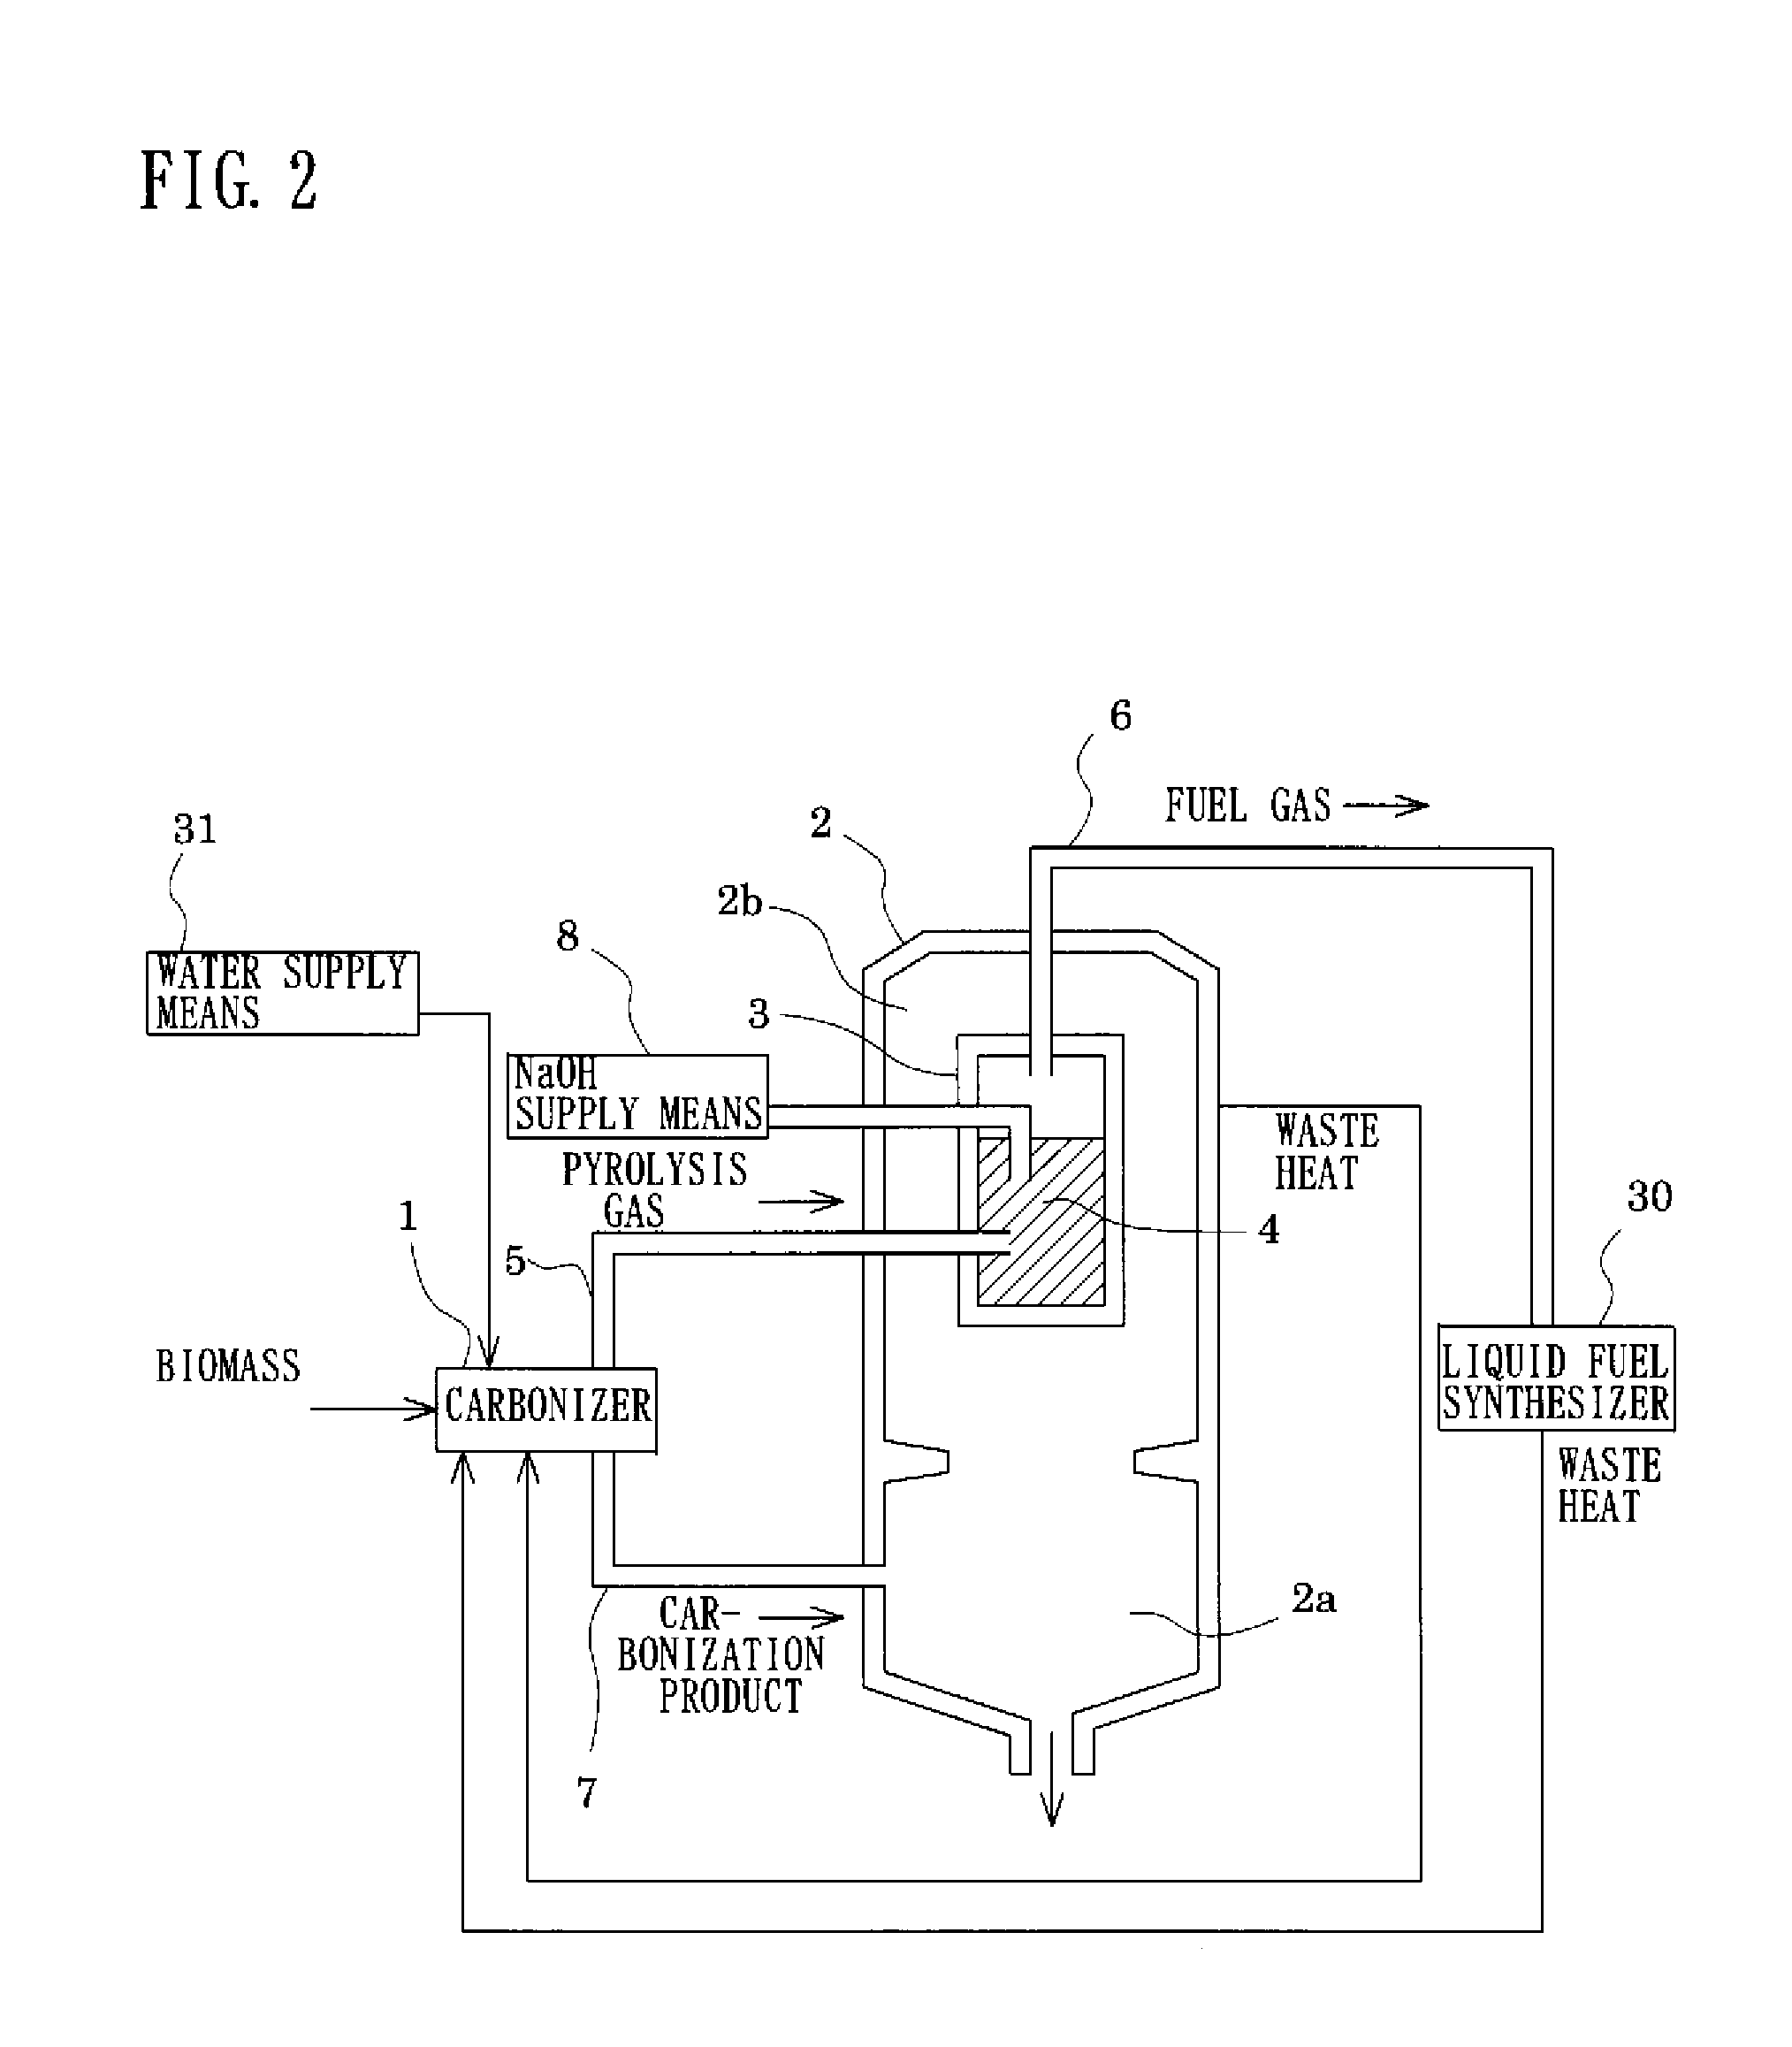 Fuel gas purification apparatus, power generation system, and fuel synthesis system